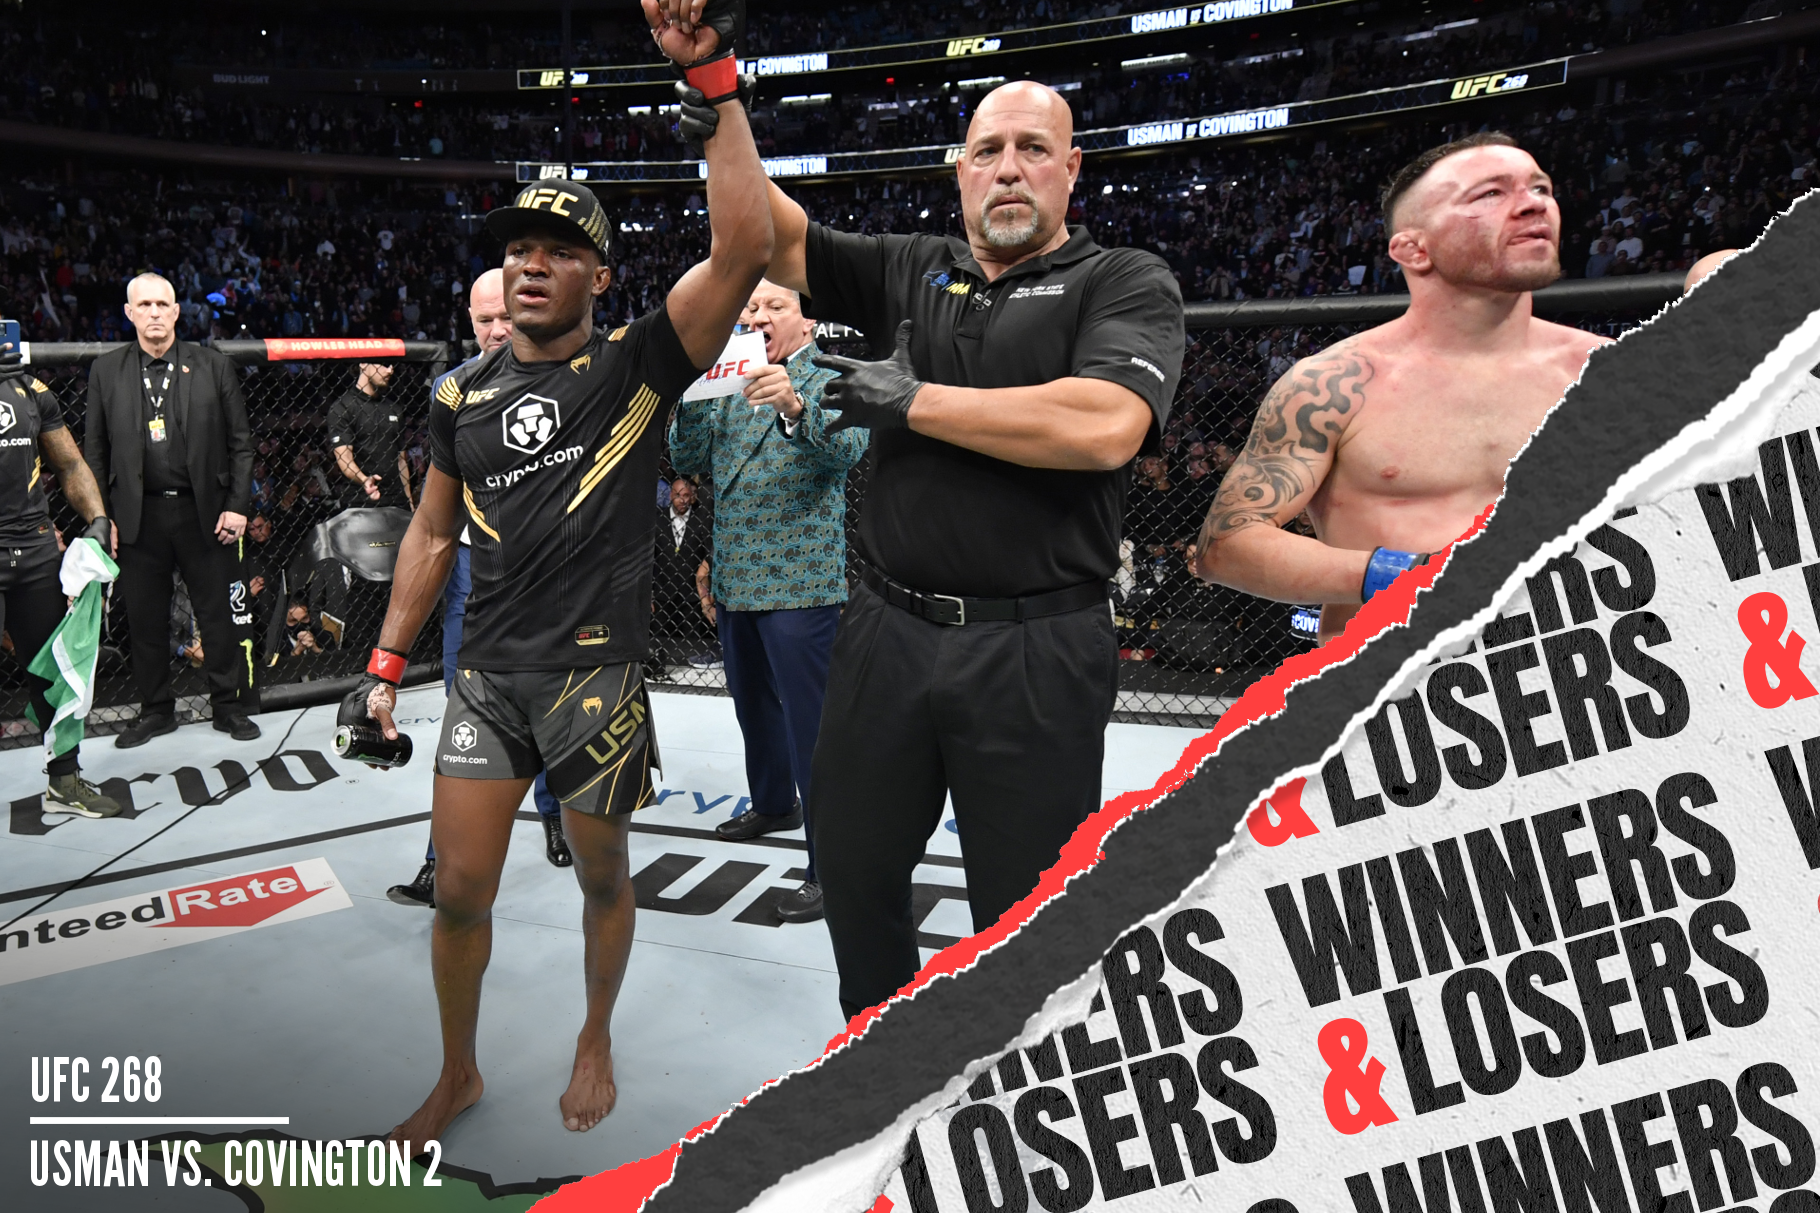 Kamaru Usman defended his UFC welterweight title with a decision win over Colby Covington.